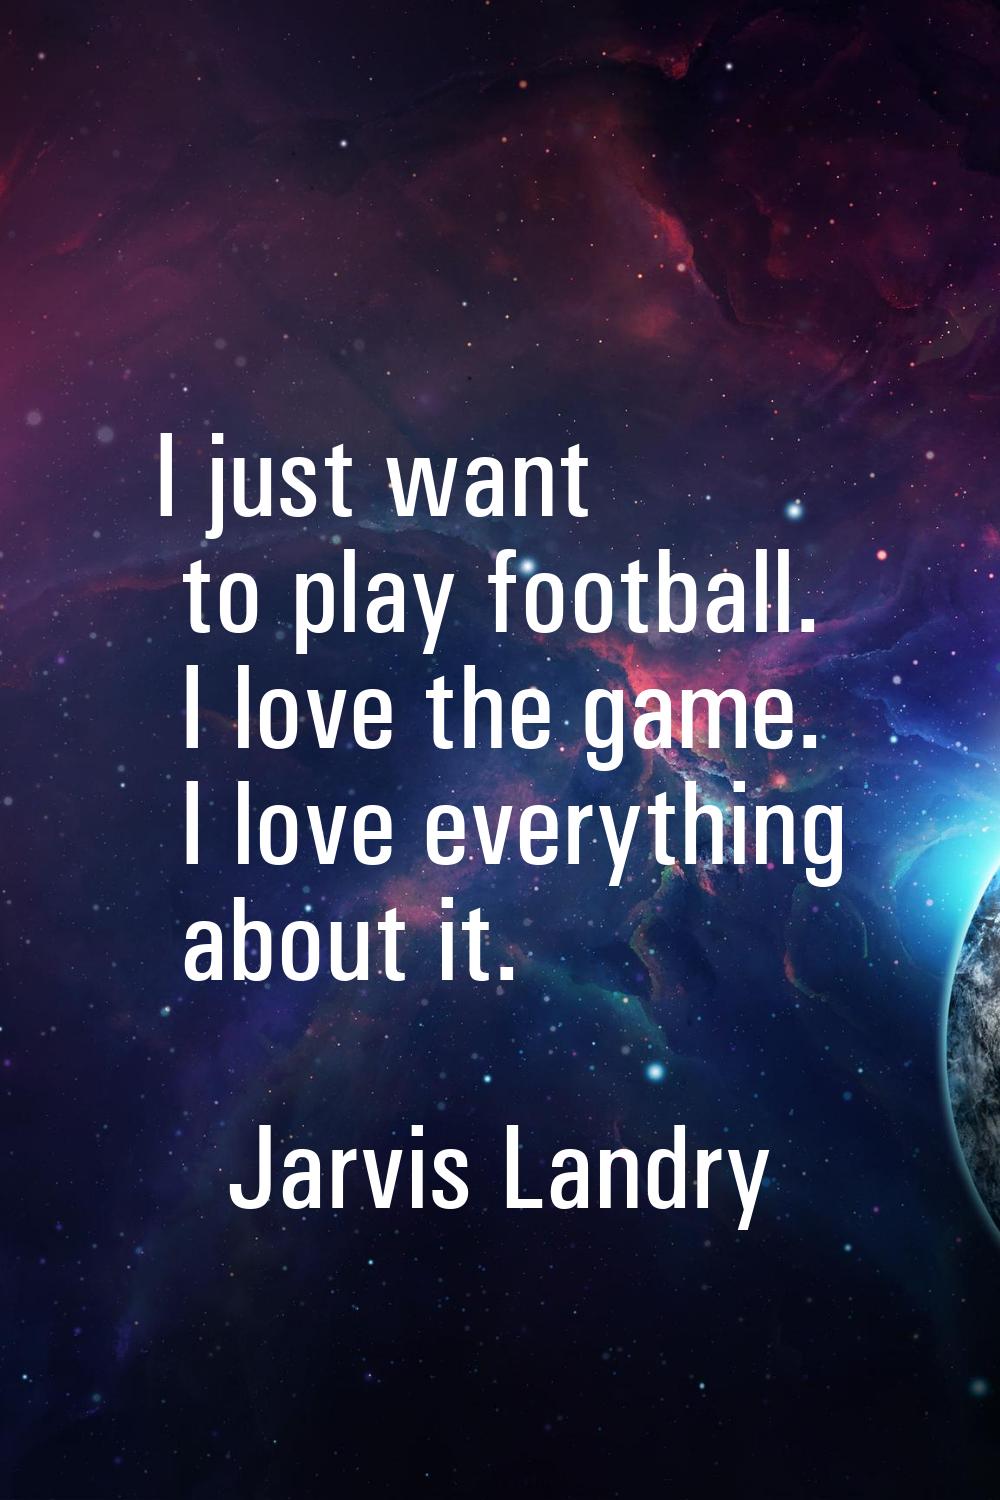 I just want to play football. I love the game. I love everything about it.